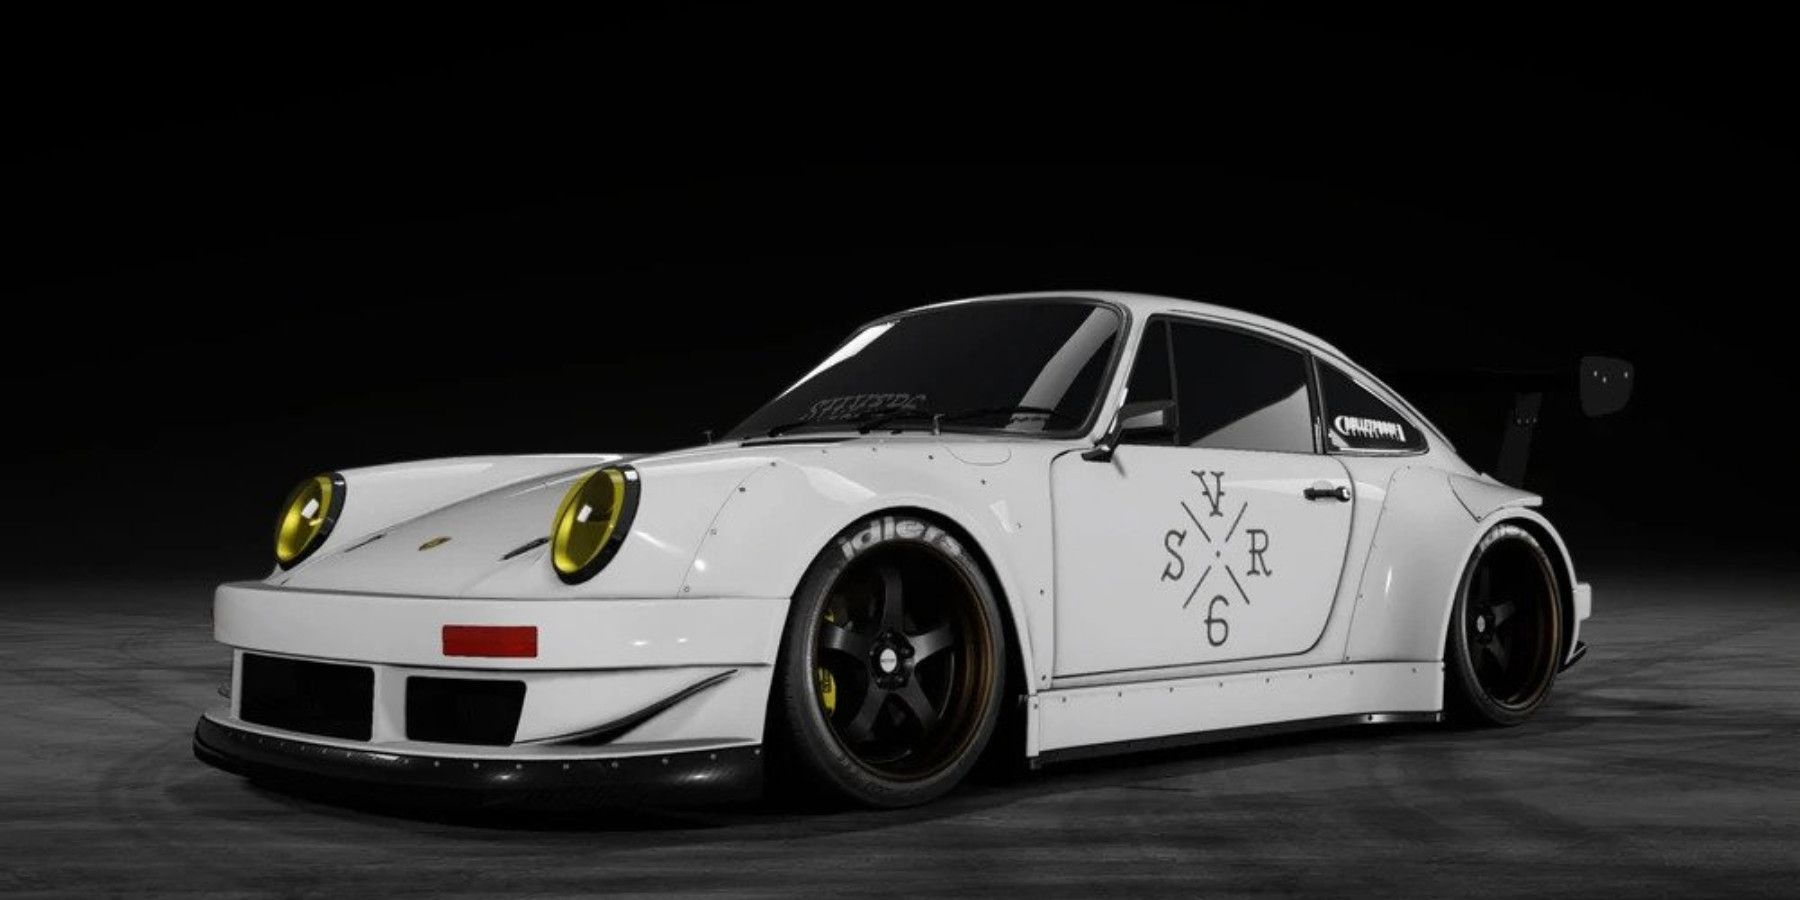 Porsche 911 Carrera RSR 2.8 Need for Speed Payback